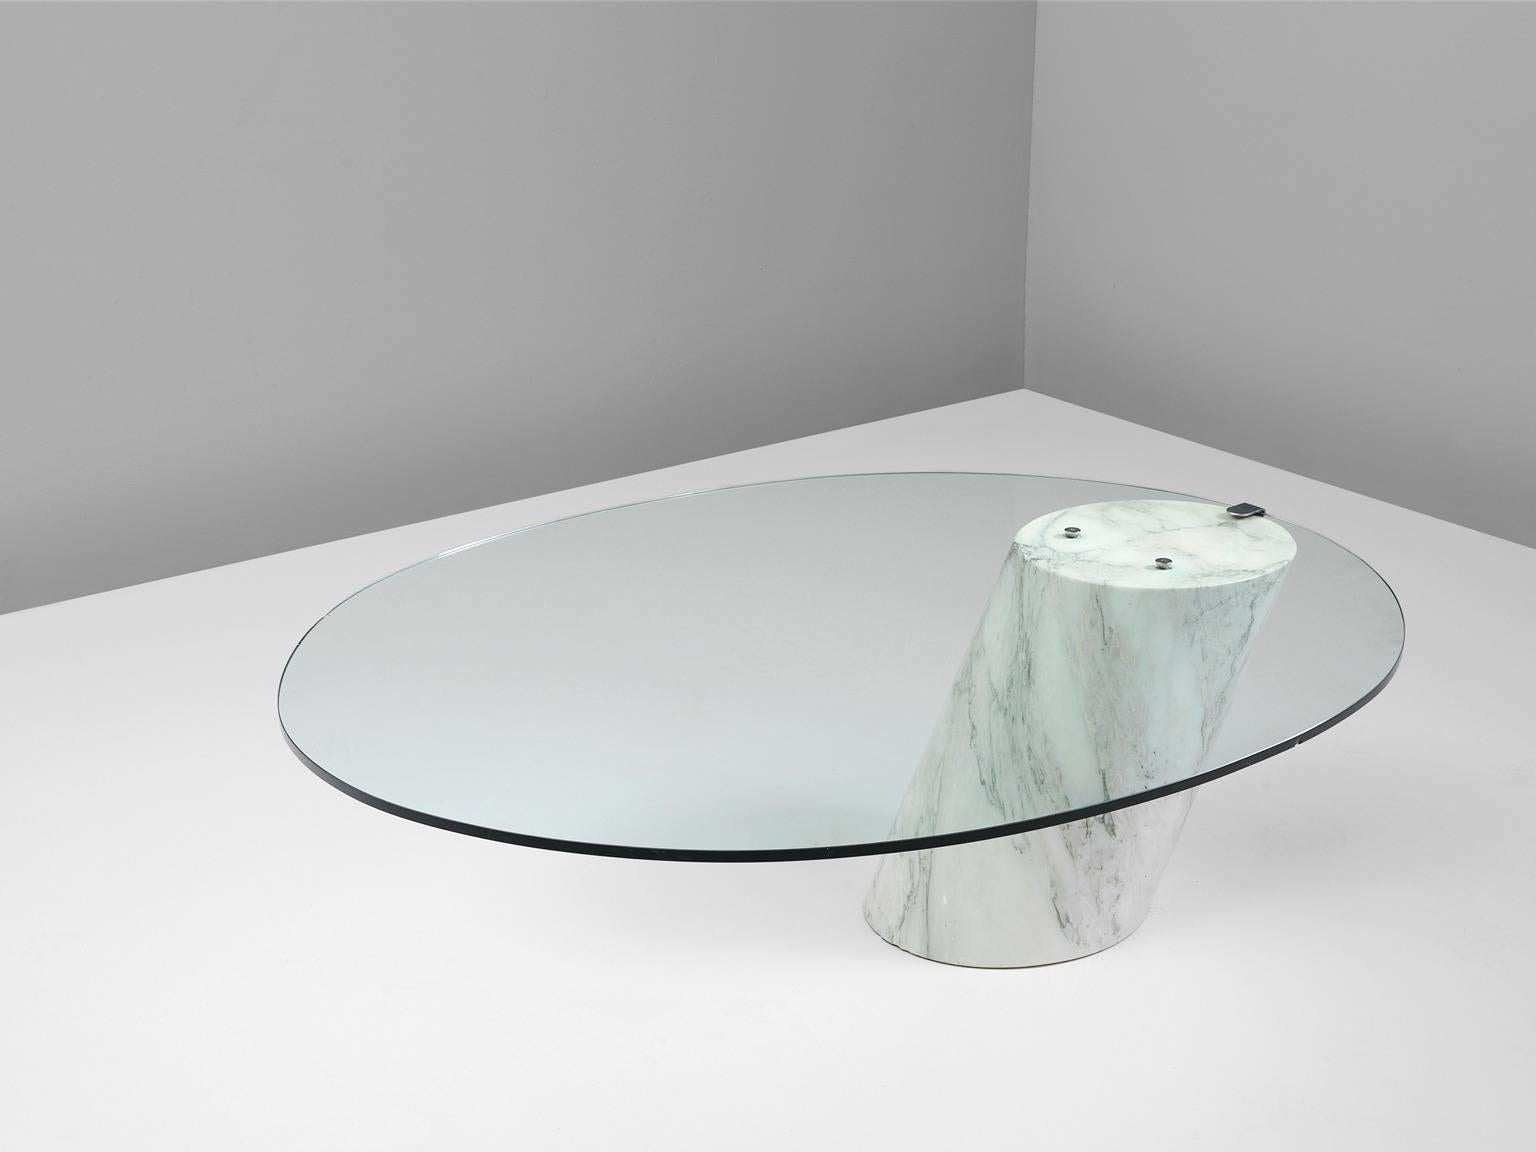 Cocktail table model K1000, in marble and glass, by Team Form AG for Ronald Schmitt, Switzerland circa 1974. 

This table is made of a solid Carrara marble base with a hardened clear glass top. The oval top is attached to the cylindrical base,